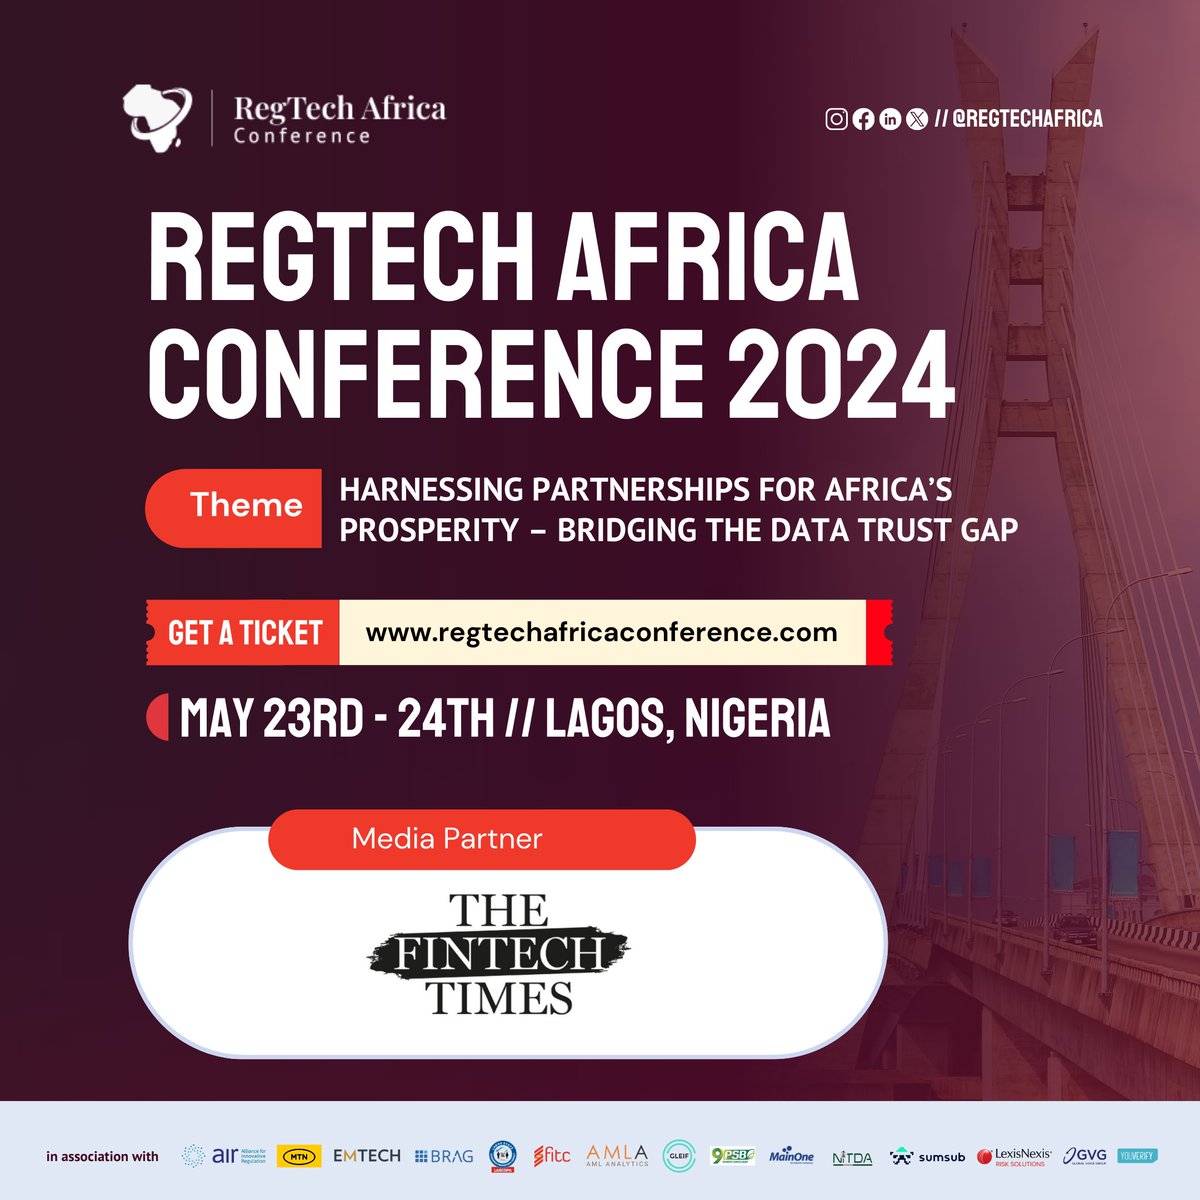 ⏰ Join the Regtech Africa Conference from May 24 to 26 for an extraordinary event at the Lagos Oriental Hotel. The 2024 Regtech Africa Conference is set to redefine data governance for growth. Register here: hubs.li/Q02wljvY0. 

#Regtechafricaconference #Regtechafrica